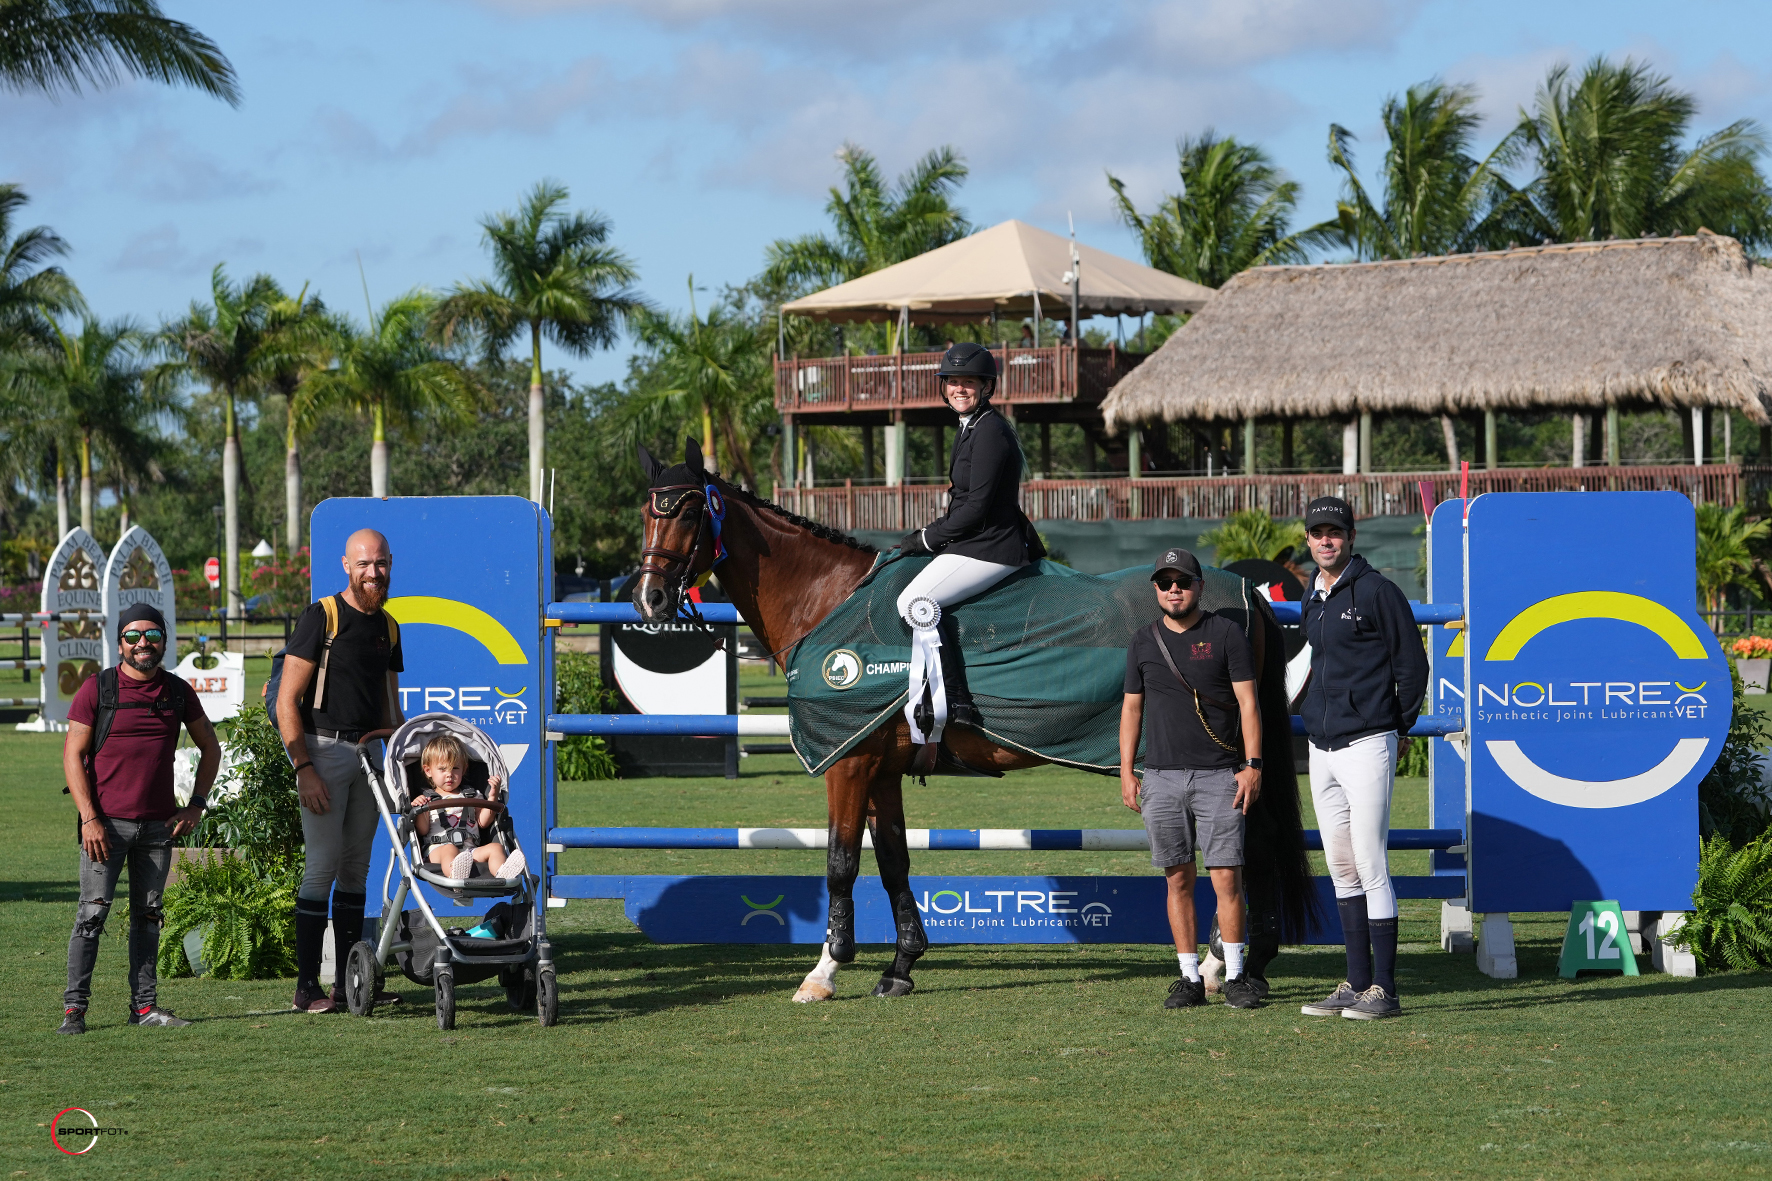 Taylor Blackman and Boucanier championed the High Amateur/Junior Jumper Division, presented by Noltrex®. Pictured with Alex and Harlow Blackman, Ryan Genn, and team